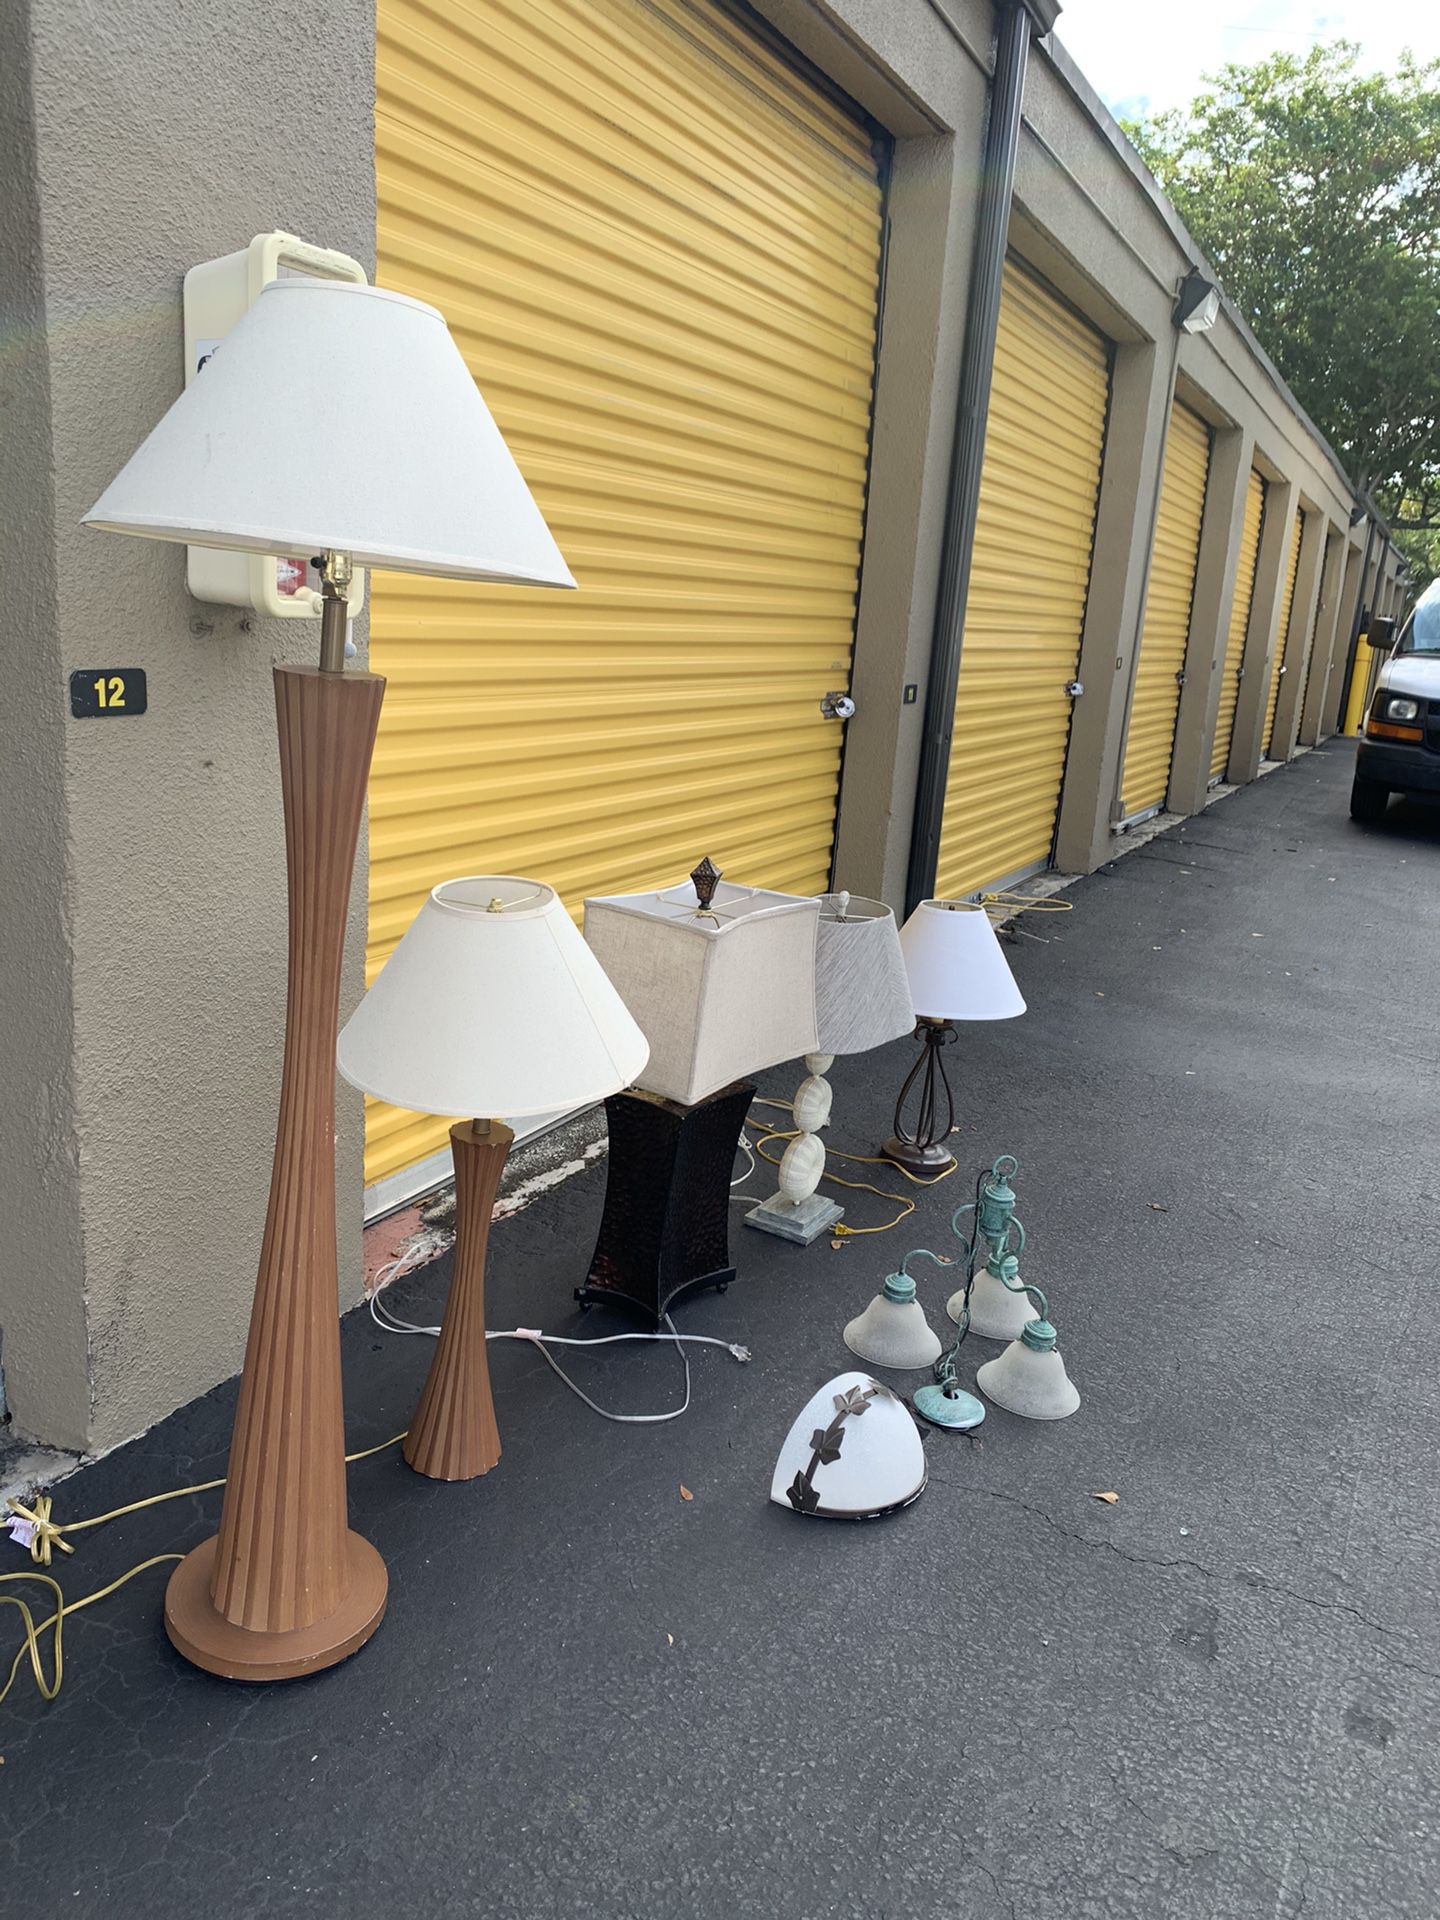 Lots and lots of lamps